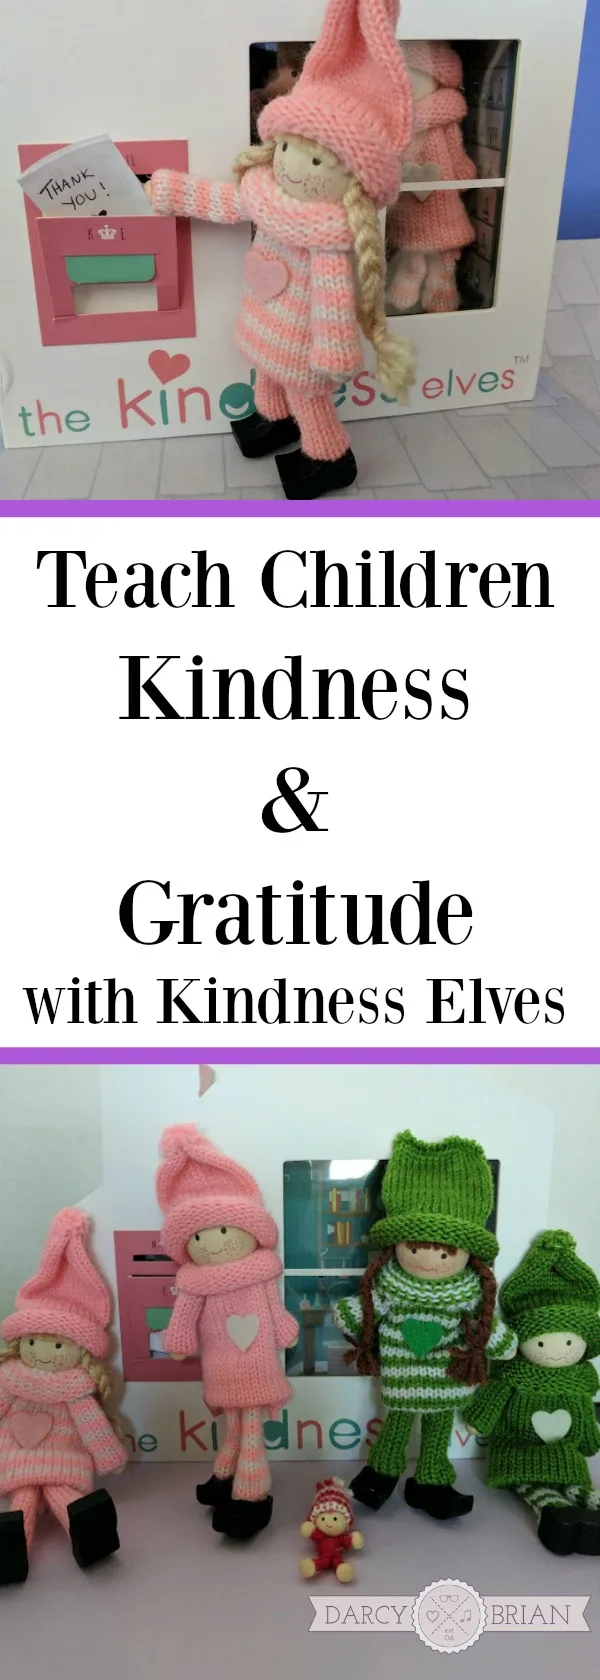 Looking for ways to teach children kindness and gratitude? Here are some ideas on how to use Kindness Elves to create positive habits within your family.